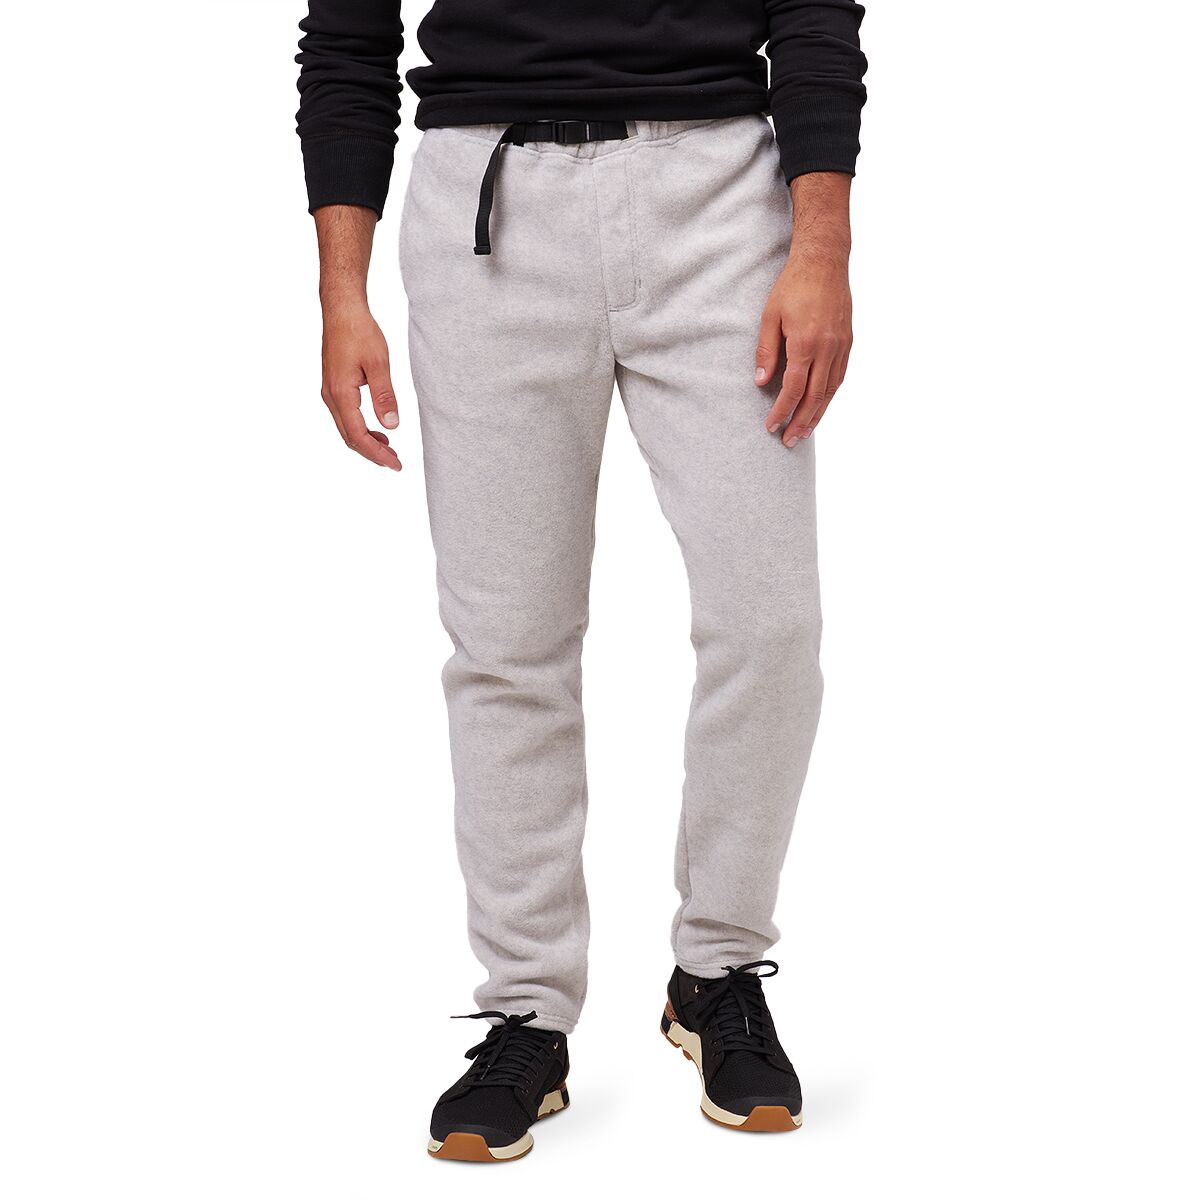 Synchilla Snap-T Fleece Pant - Men's by Patagonia | US-Parks.com